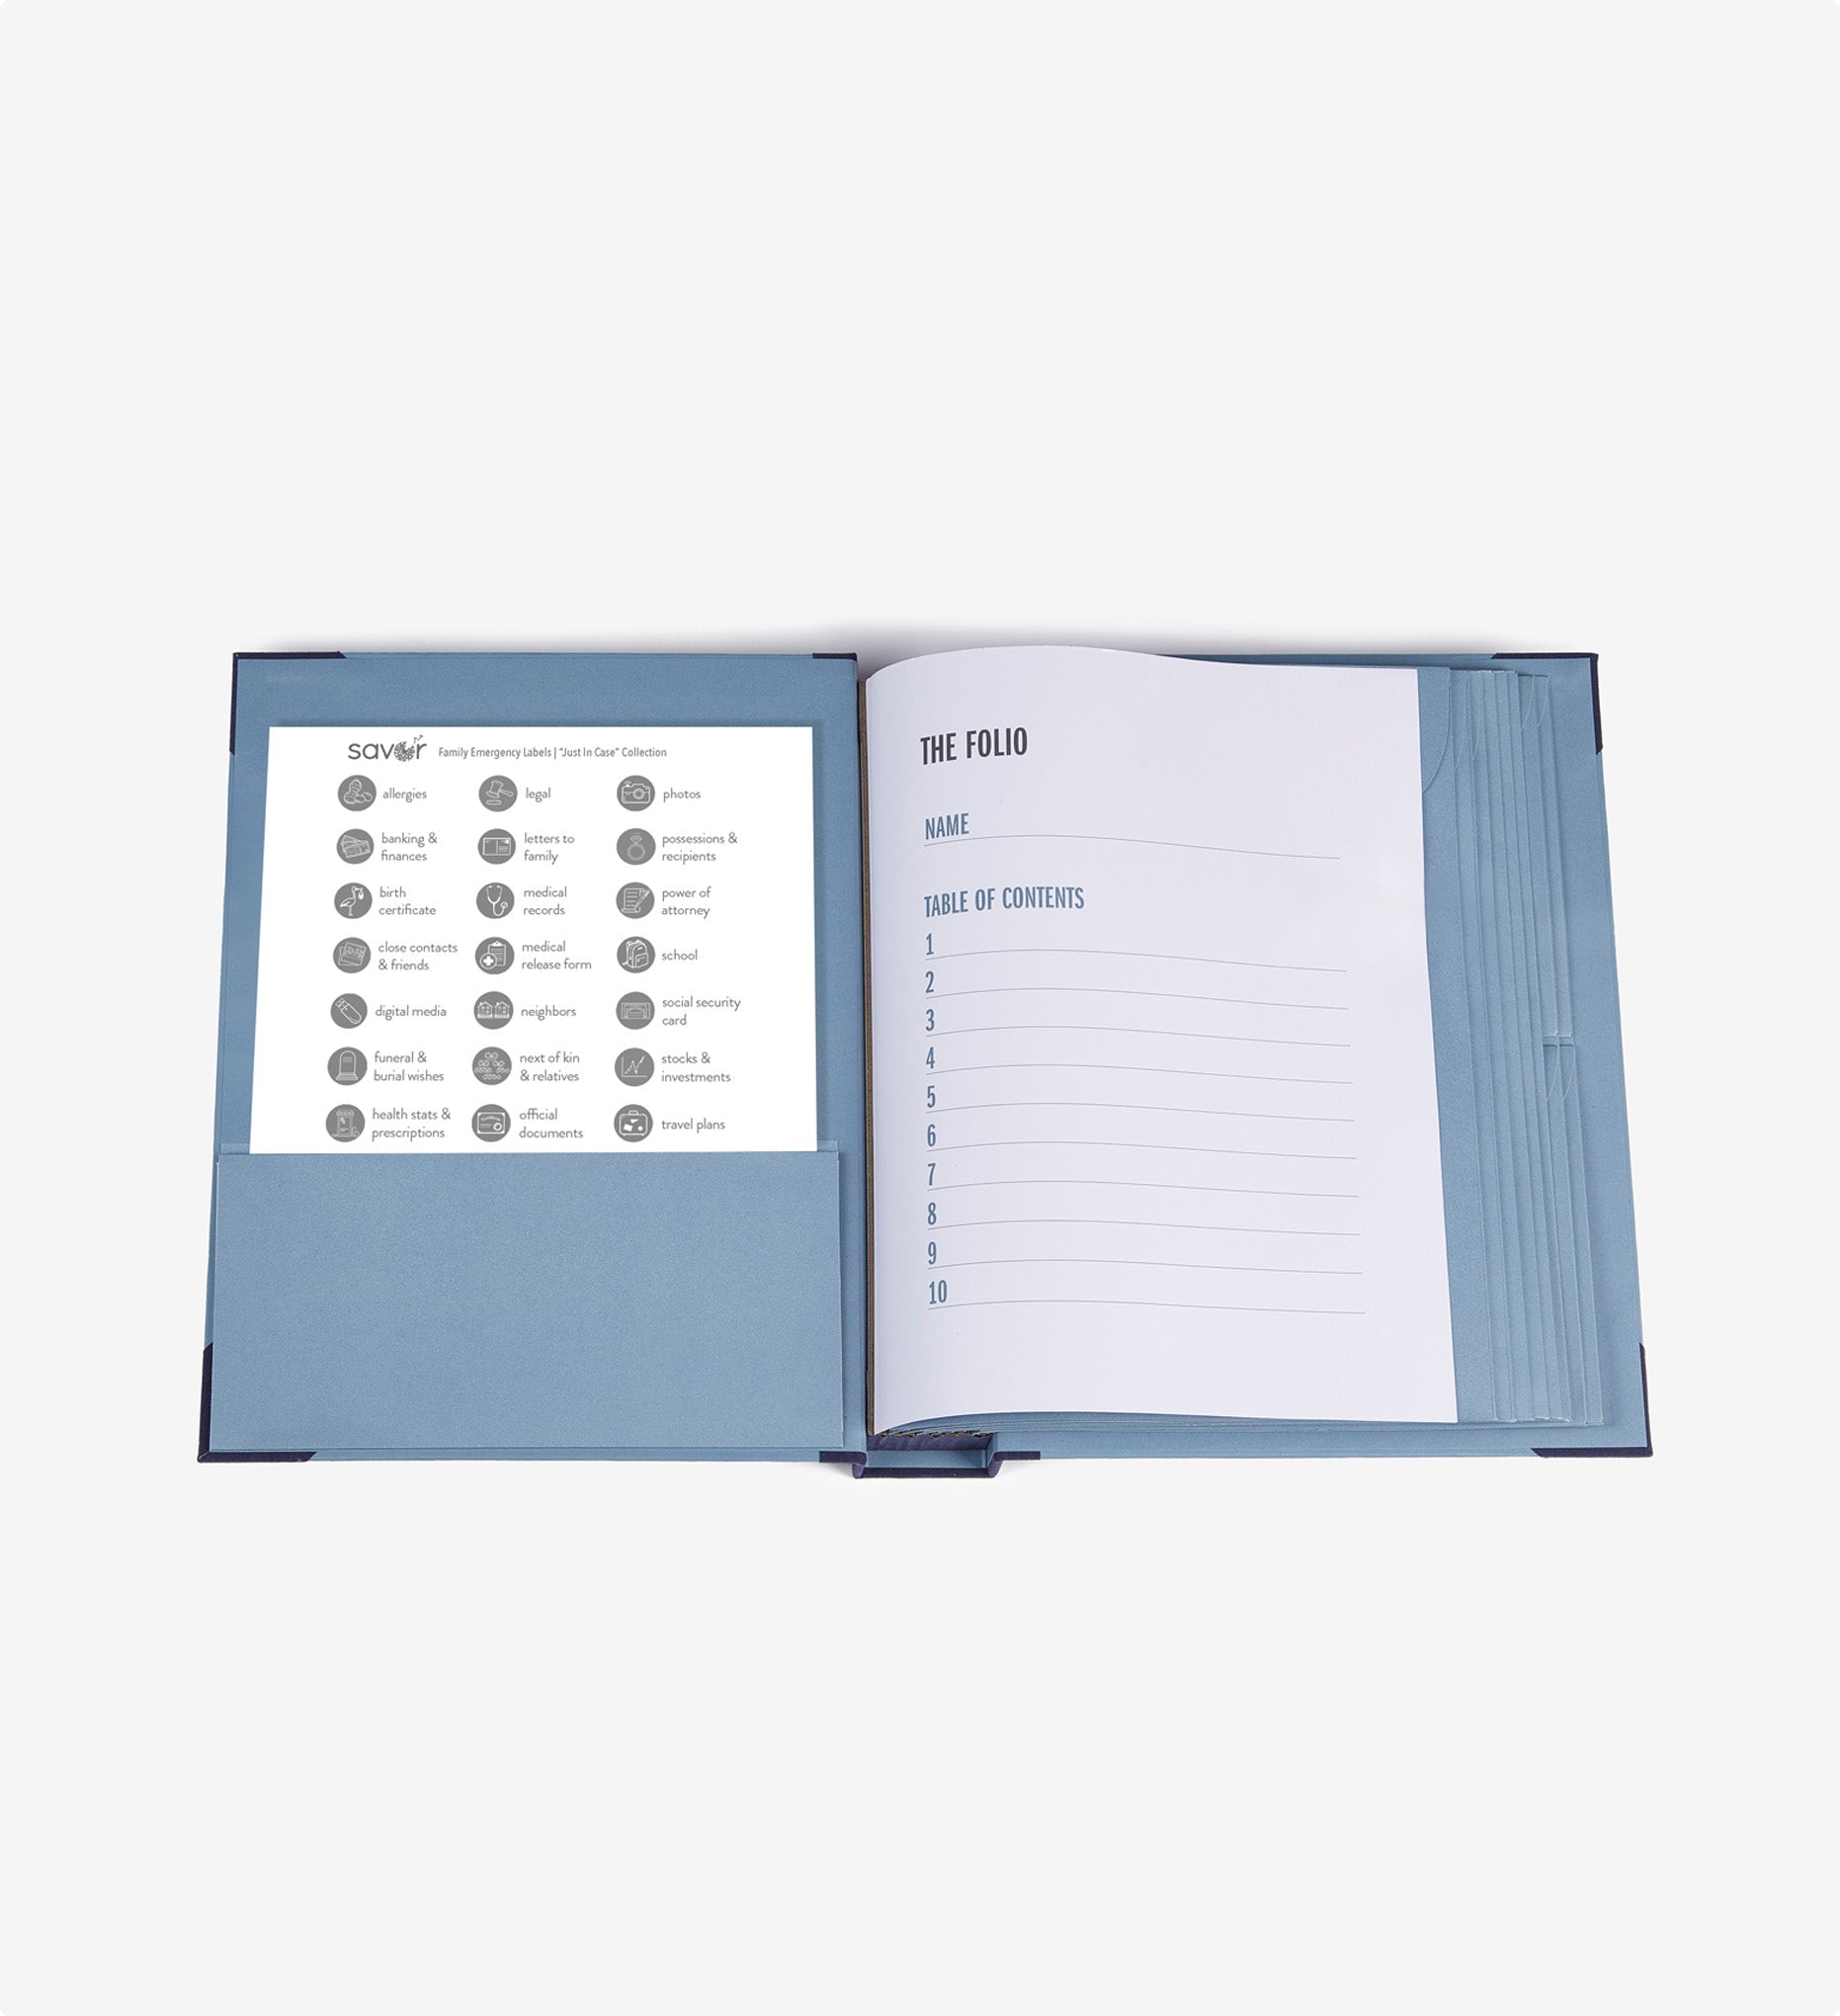 Savor folio document organizer, open with table of contents and labels on the left